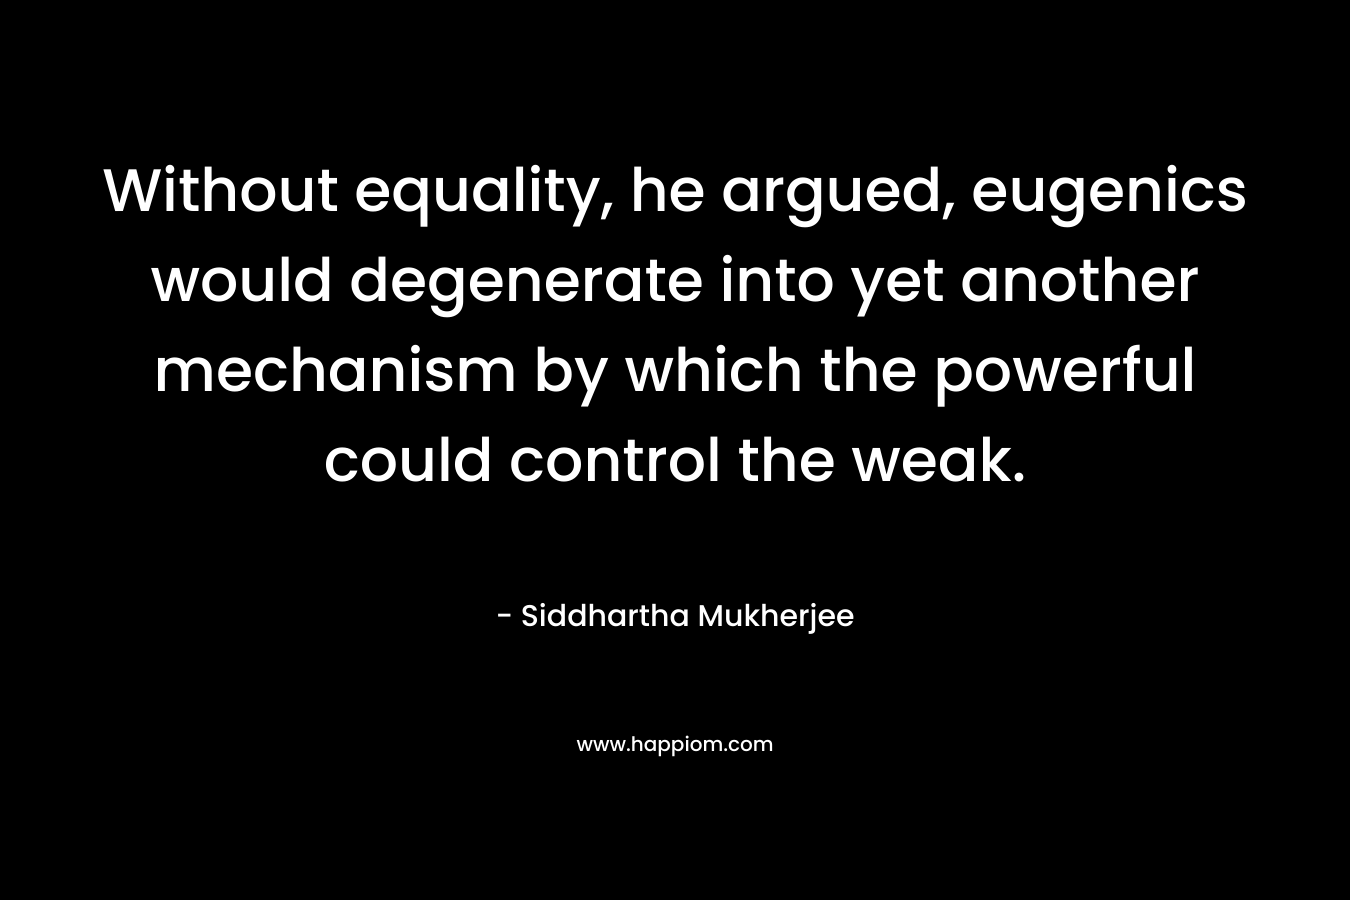 Without equality, he argued, eugenics would degenerate into yet another mechanism by which the powerful could control the weak.